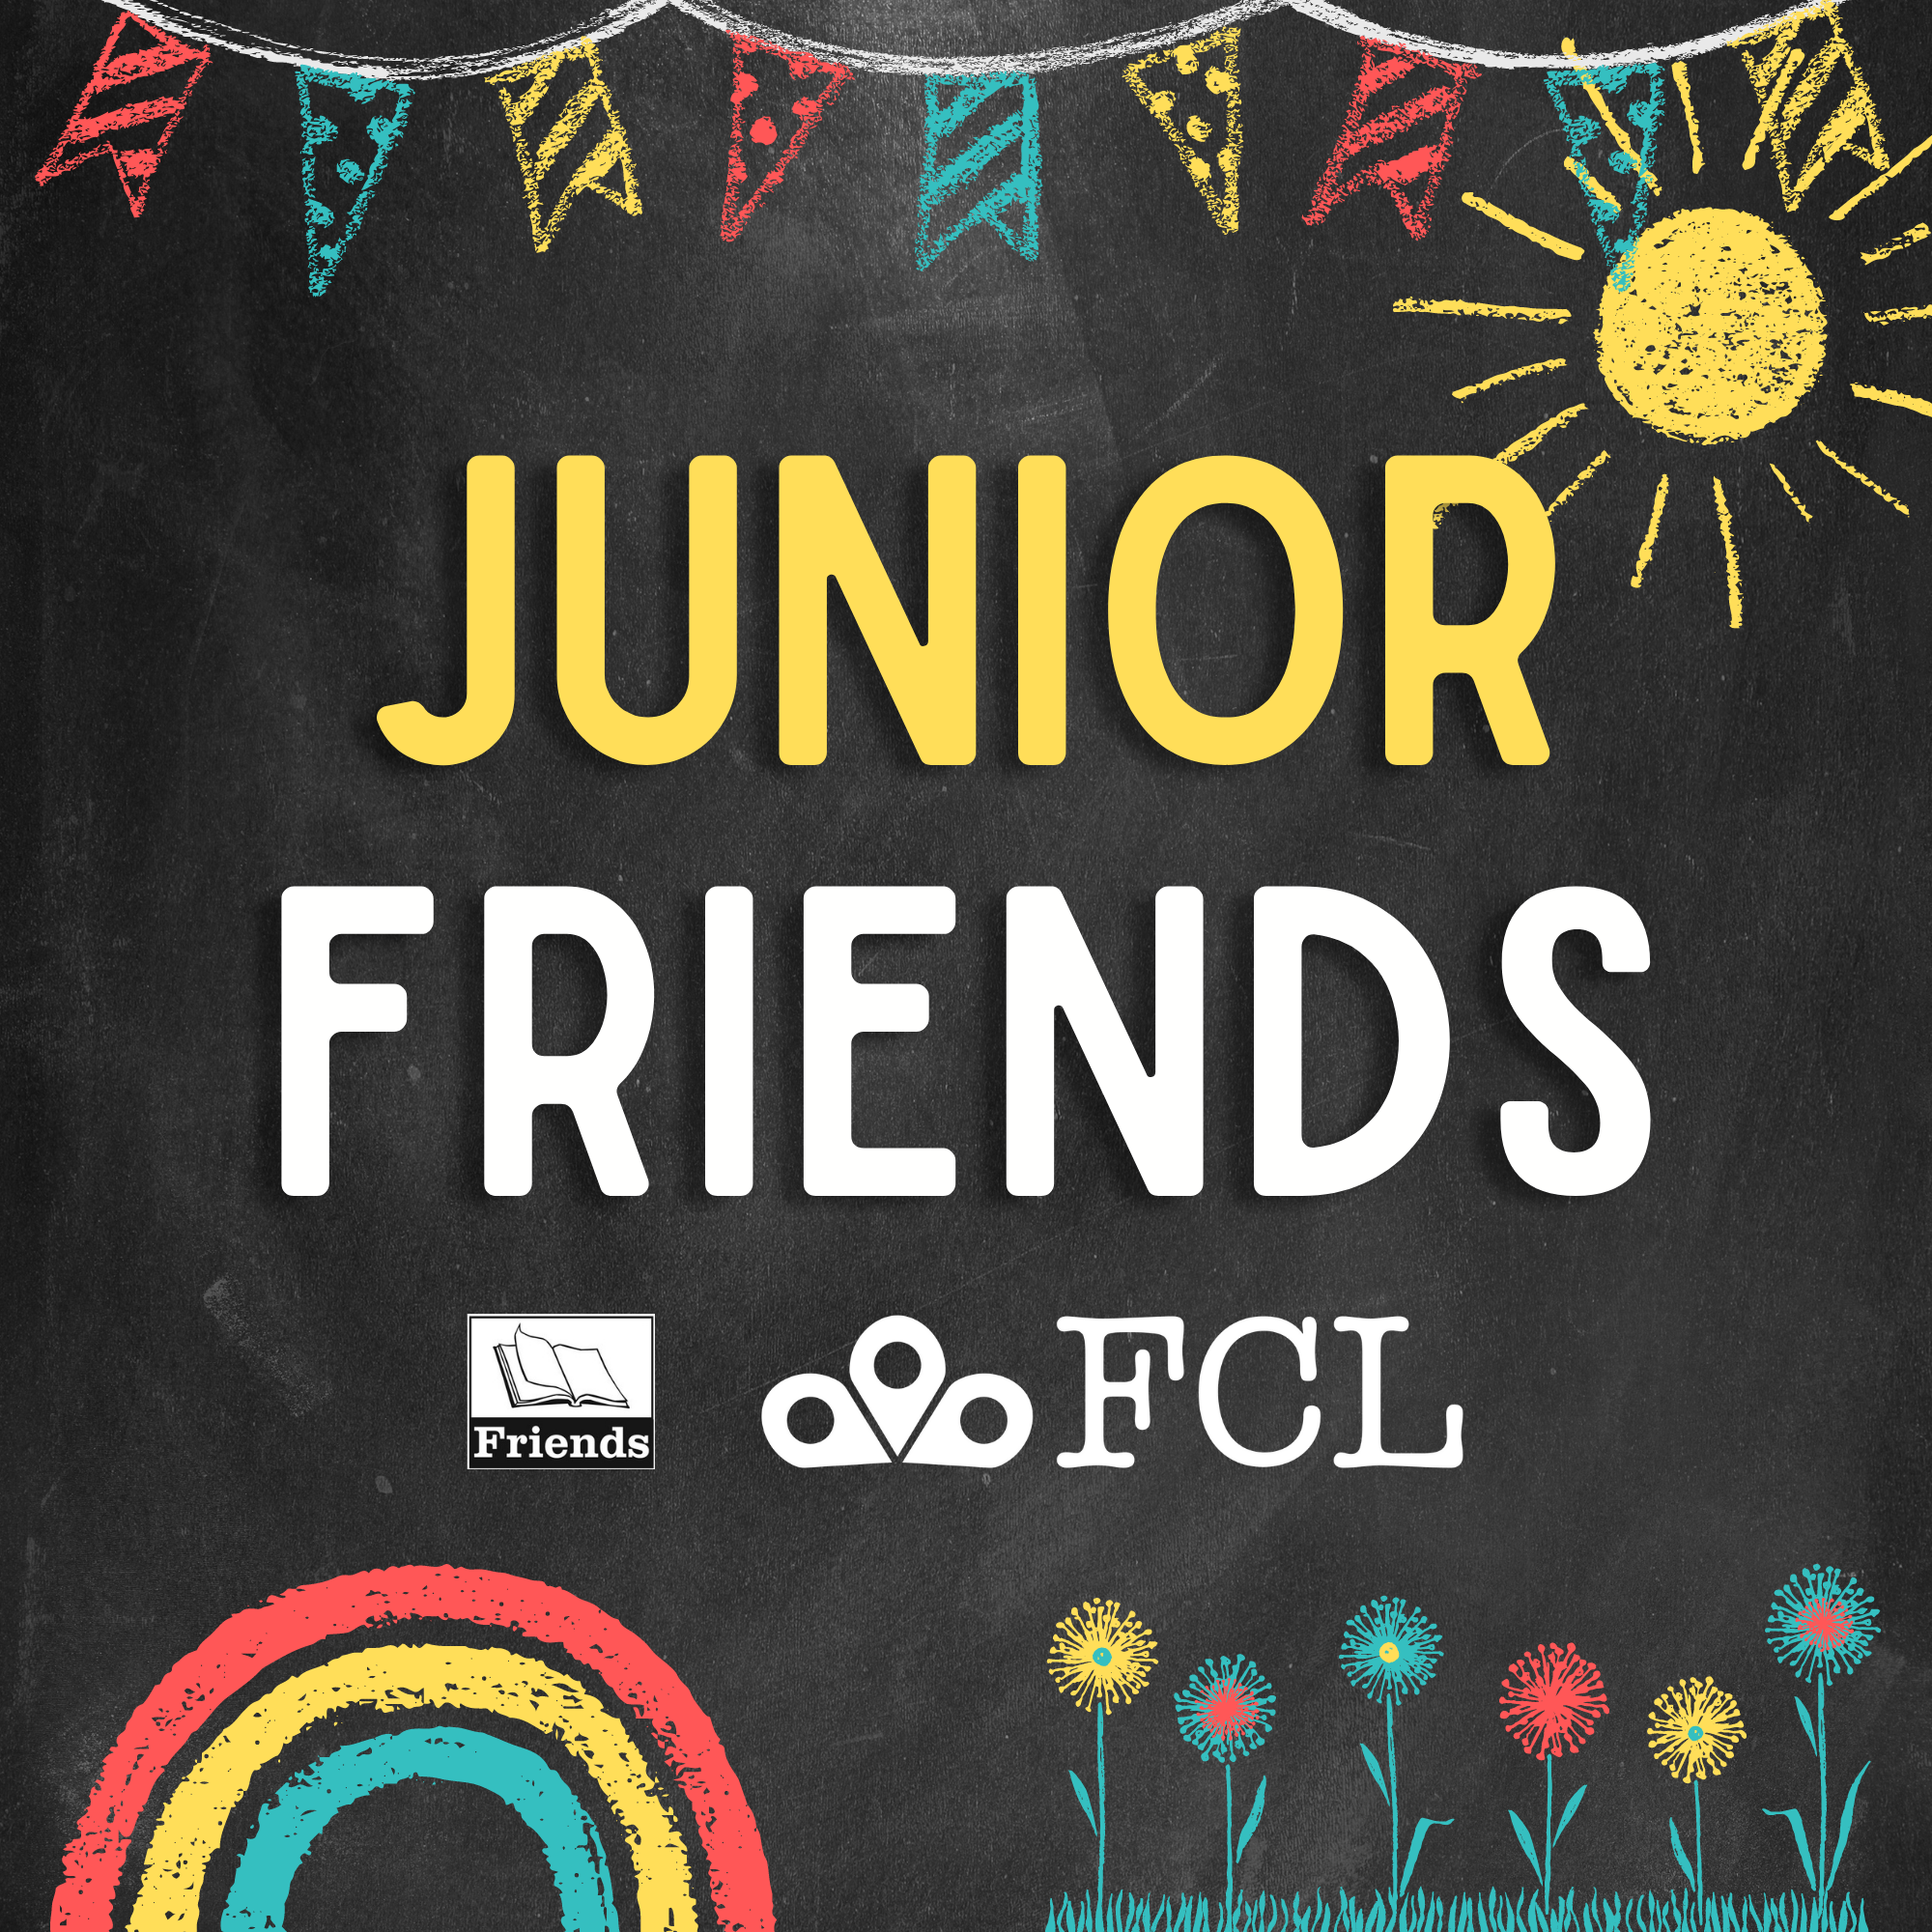 Junior Friends of the Library Club